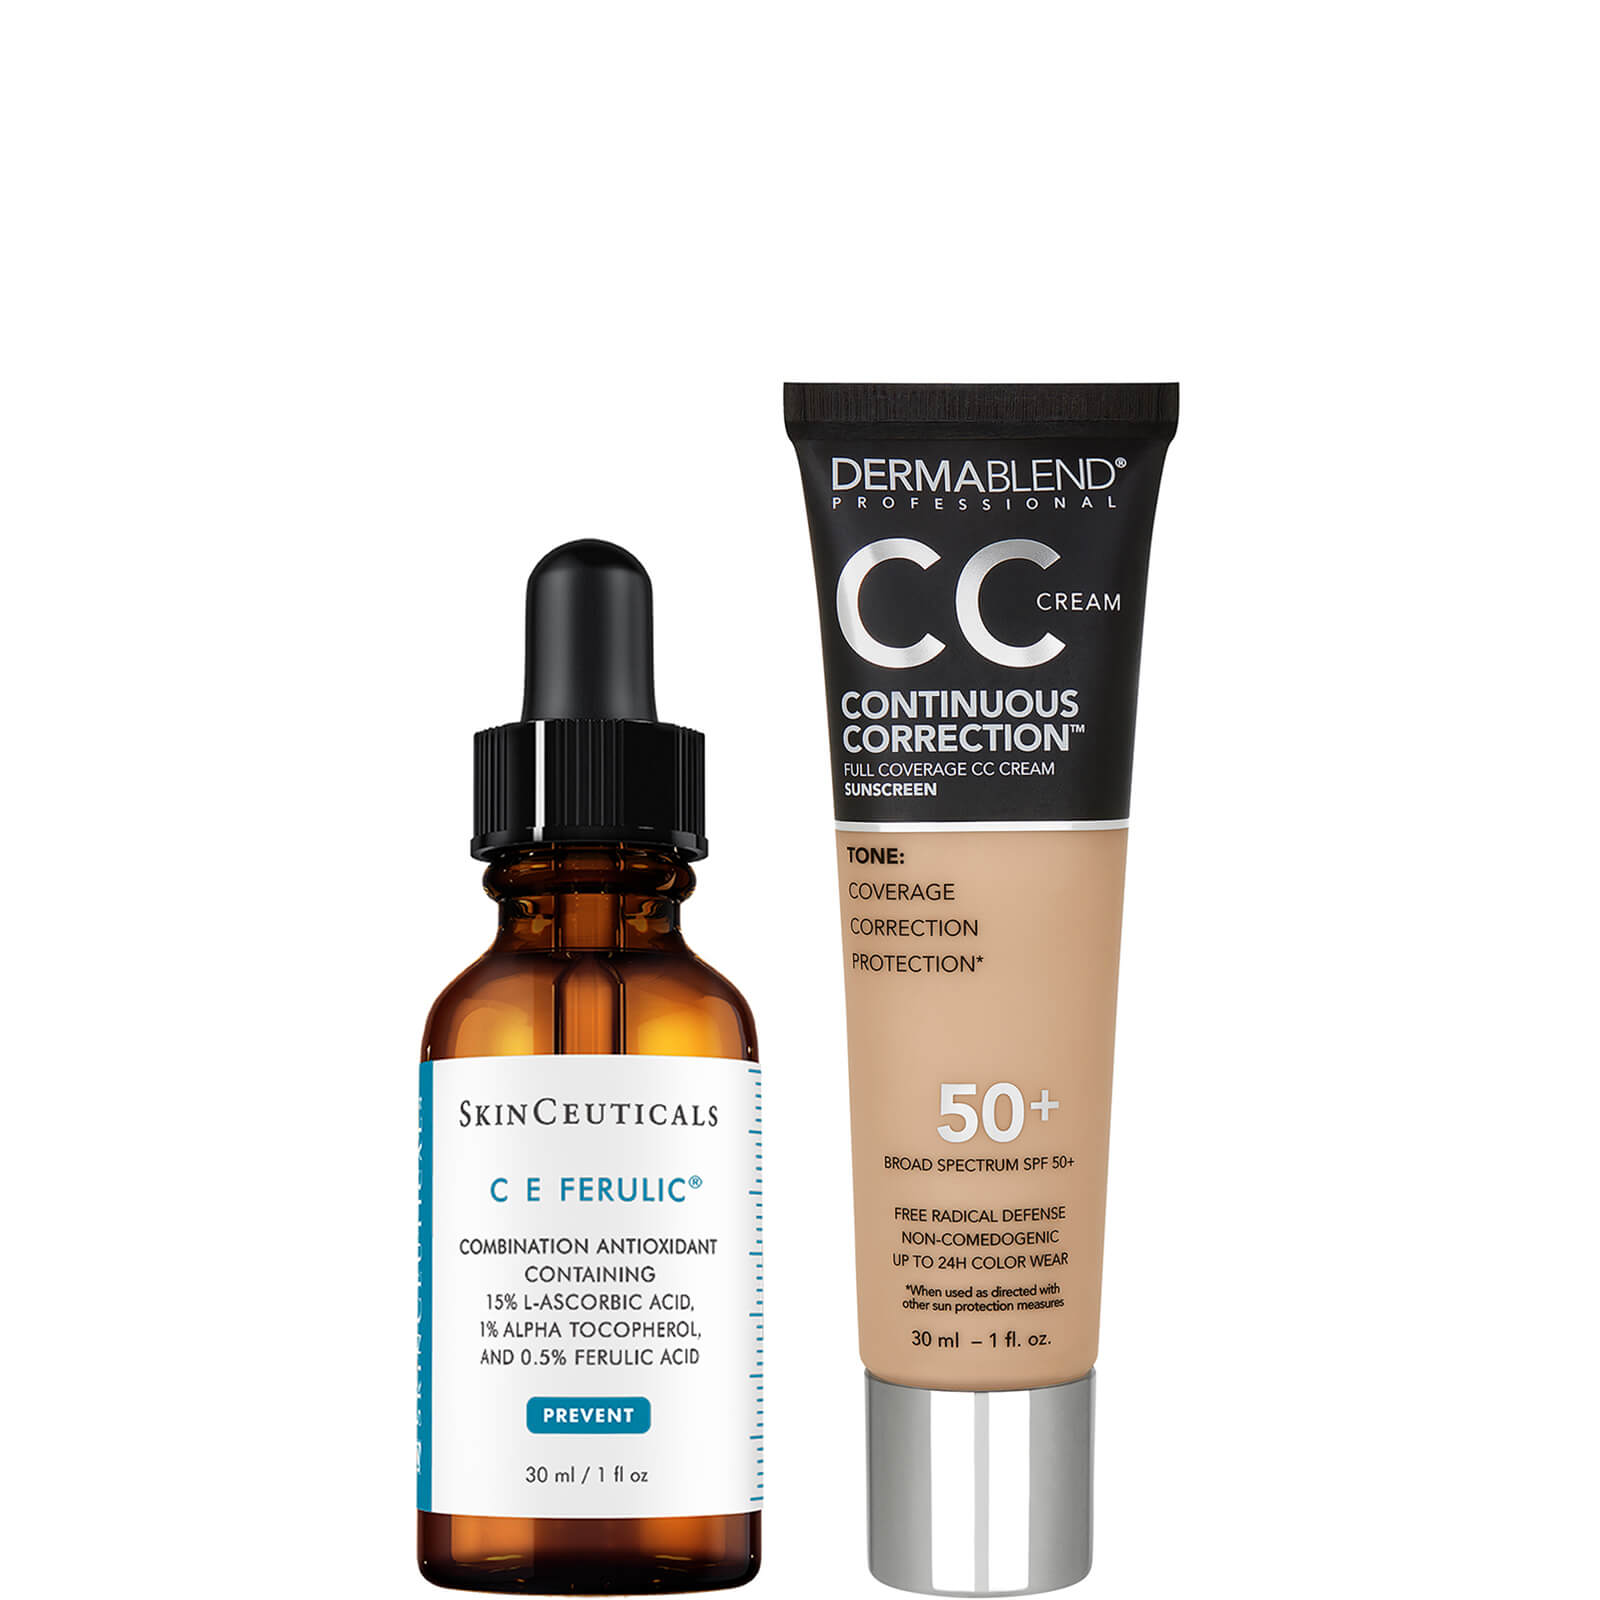 SkinCeuticals and Dermablend Anti-Aging Brightening Duo with Vitamin C and Niacinamide (Various Shades) ($223 Value) - 37N Medium 1